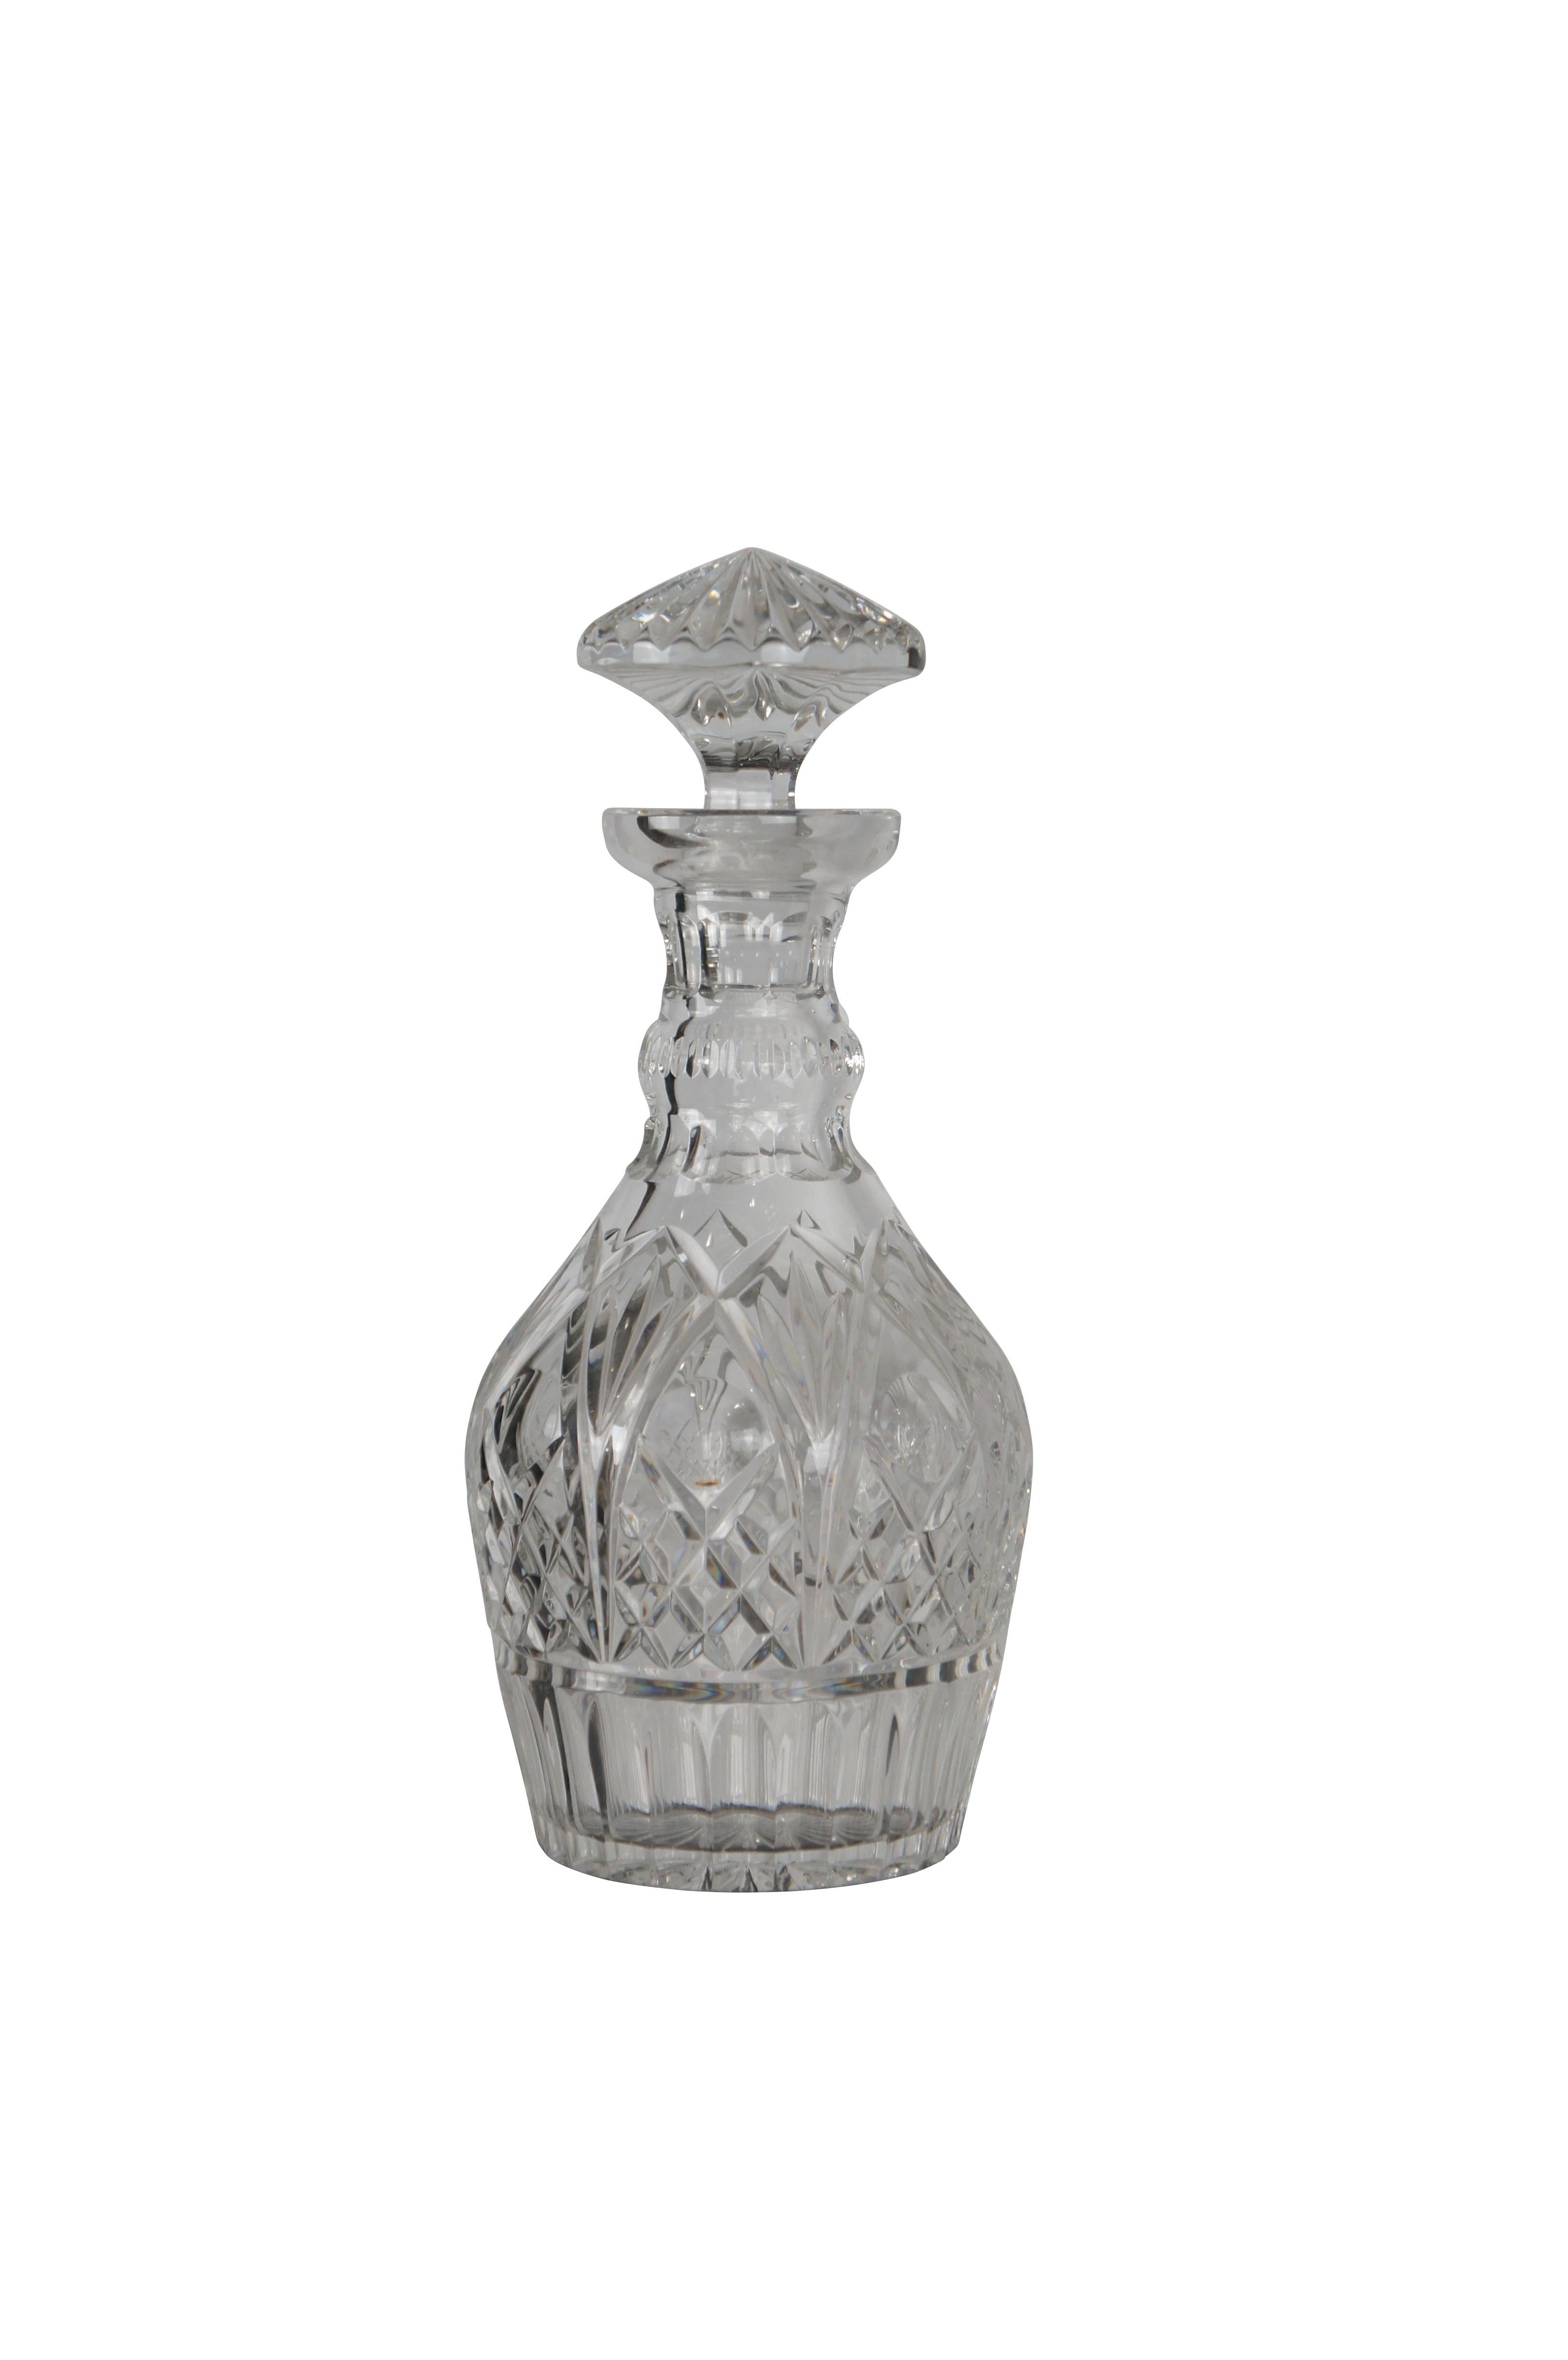 Carafe et bouchon Waterford Meagher Limited Edition

Dimensions :
5,5